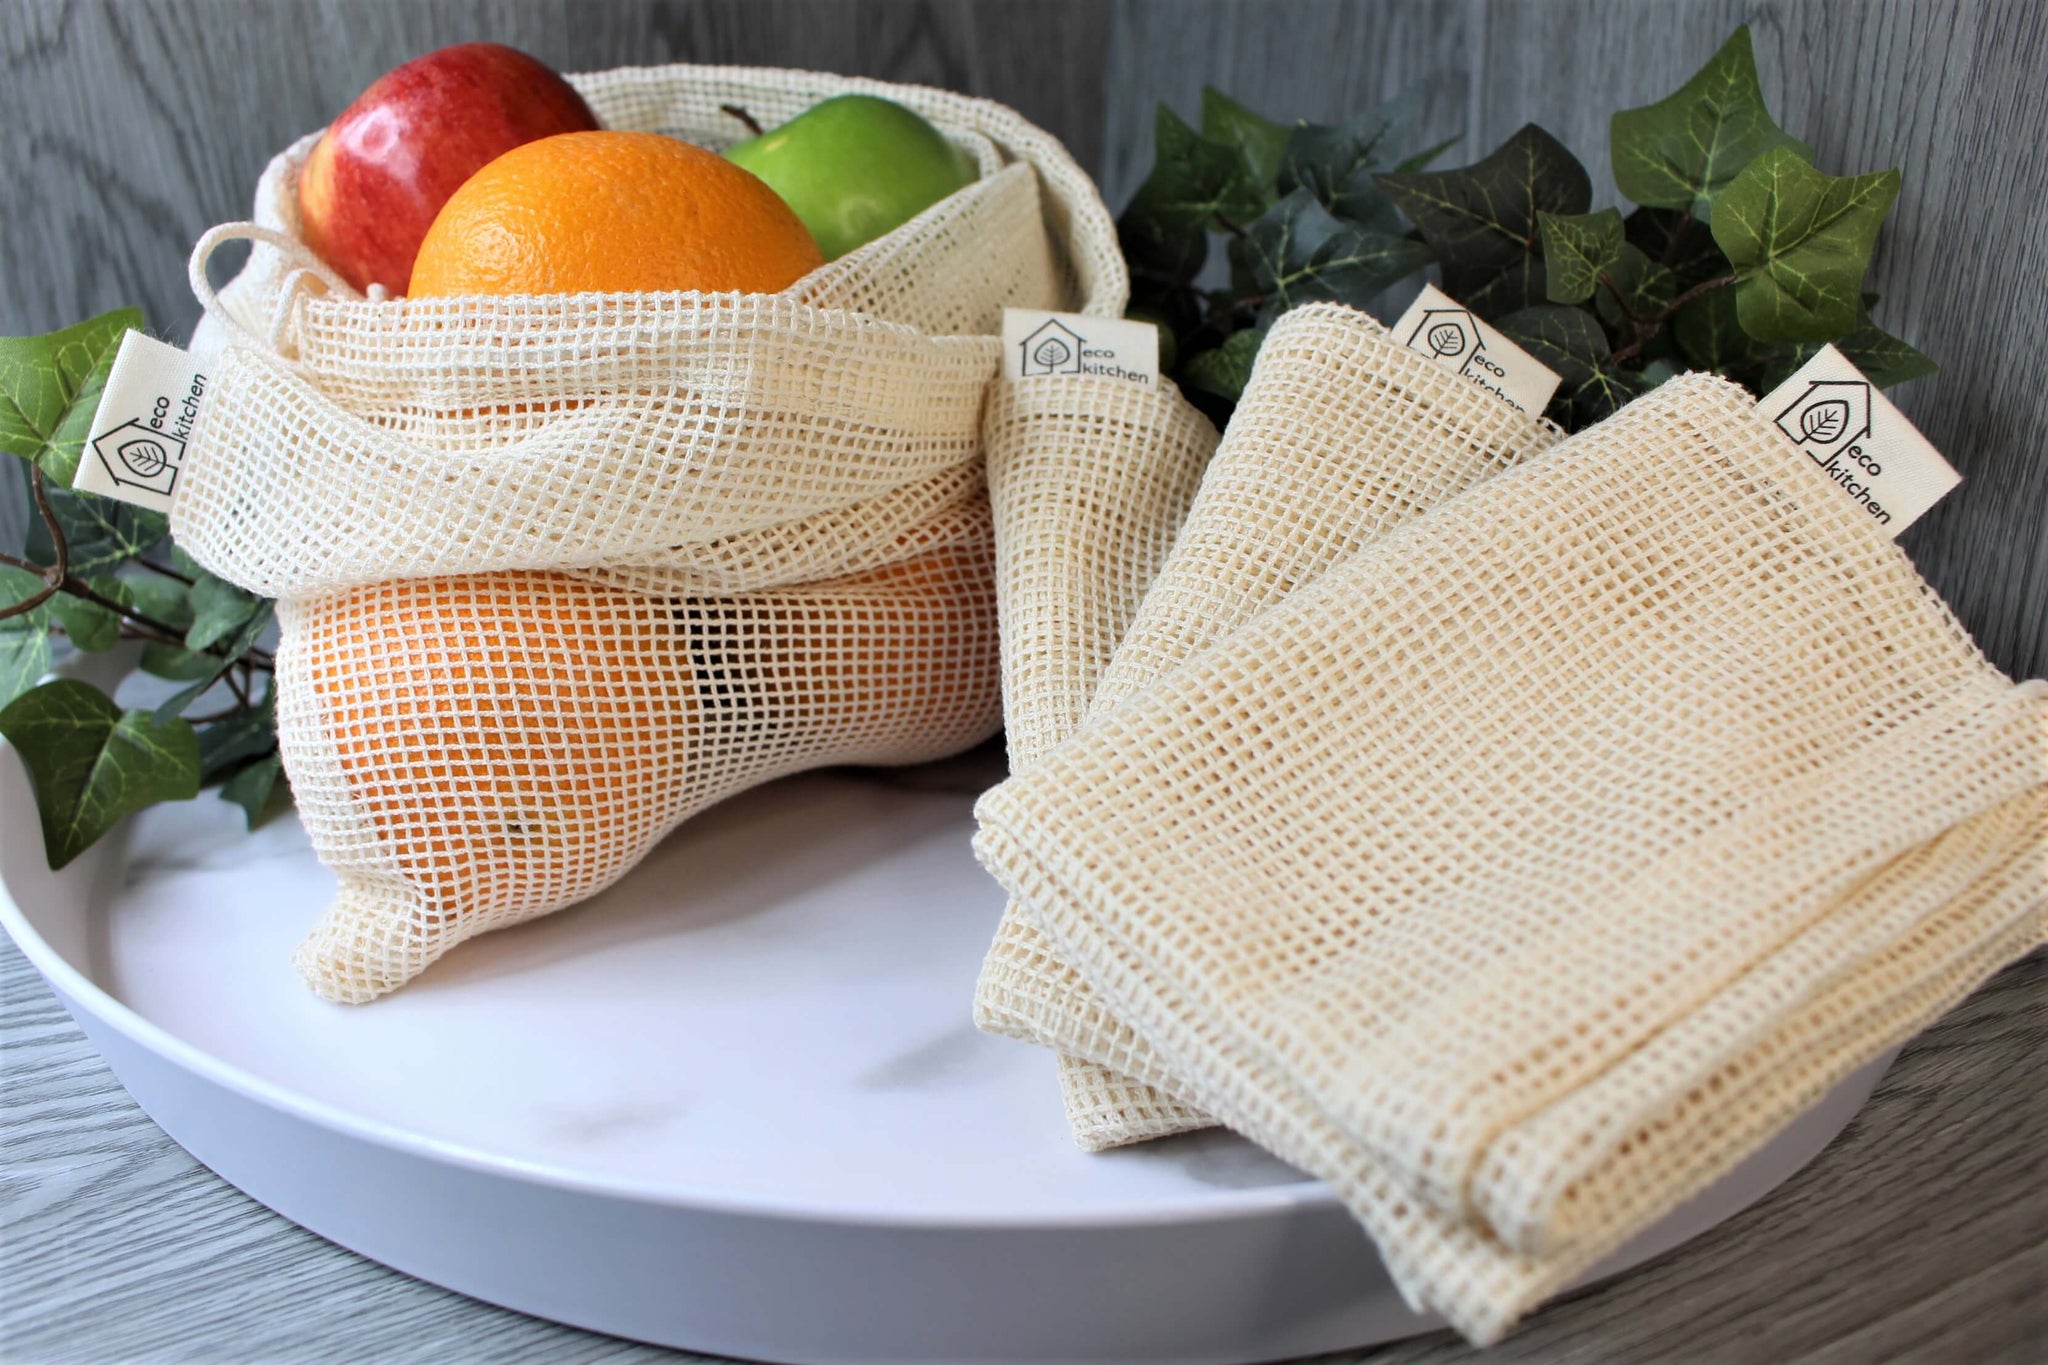 A Definitive Manual for Utilizing Mesh Bag for Produce